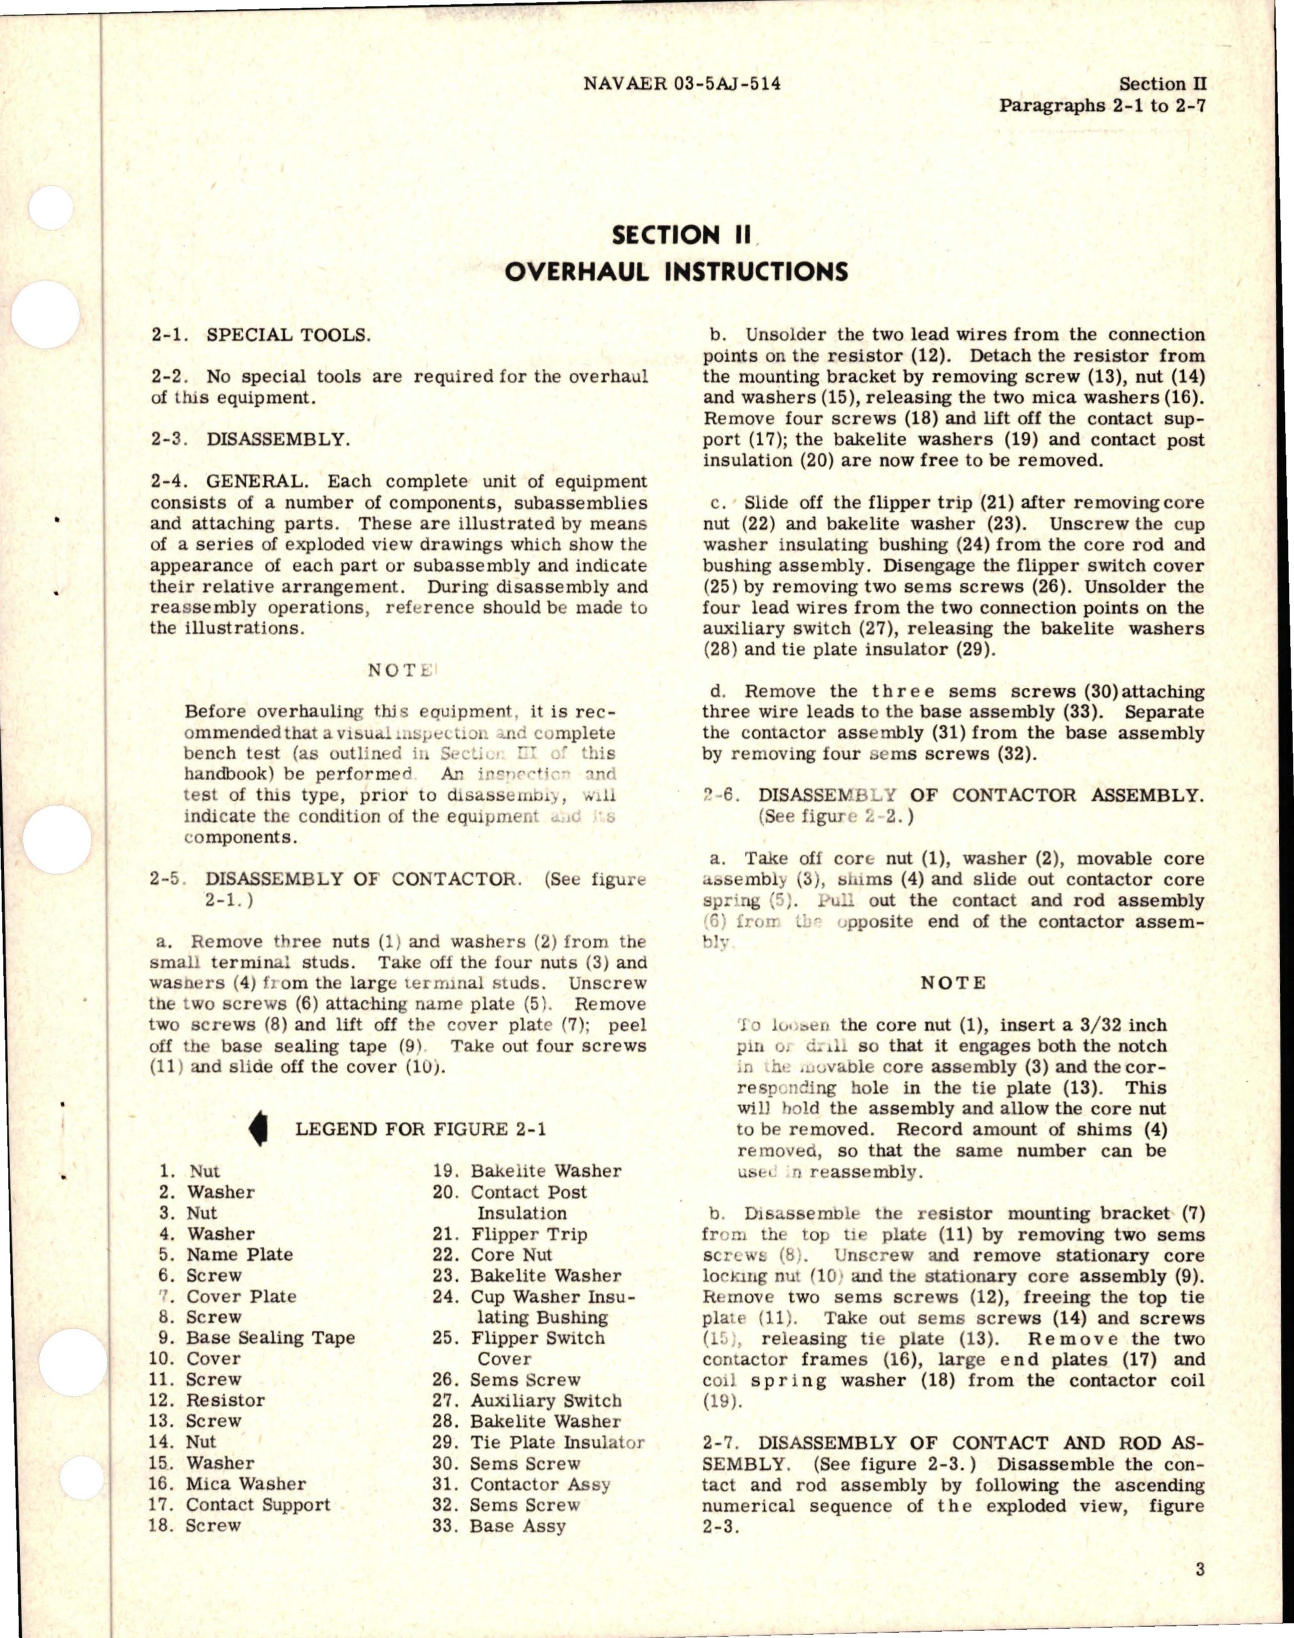 Sample page 7 from AirCorps Library document: Overhaul Instructions for Solenoid Relay - Parts A-792 and A-792KB